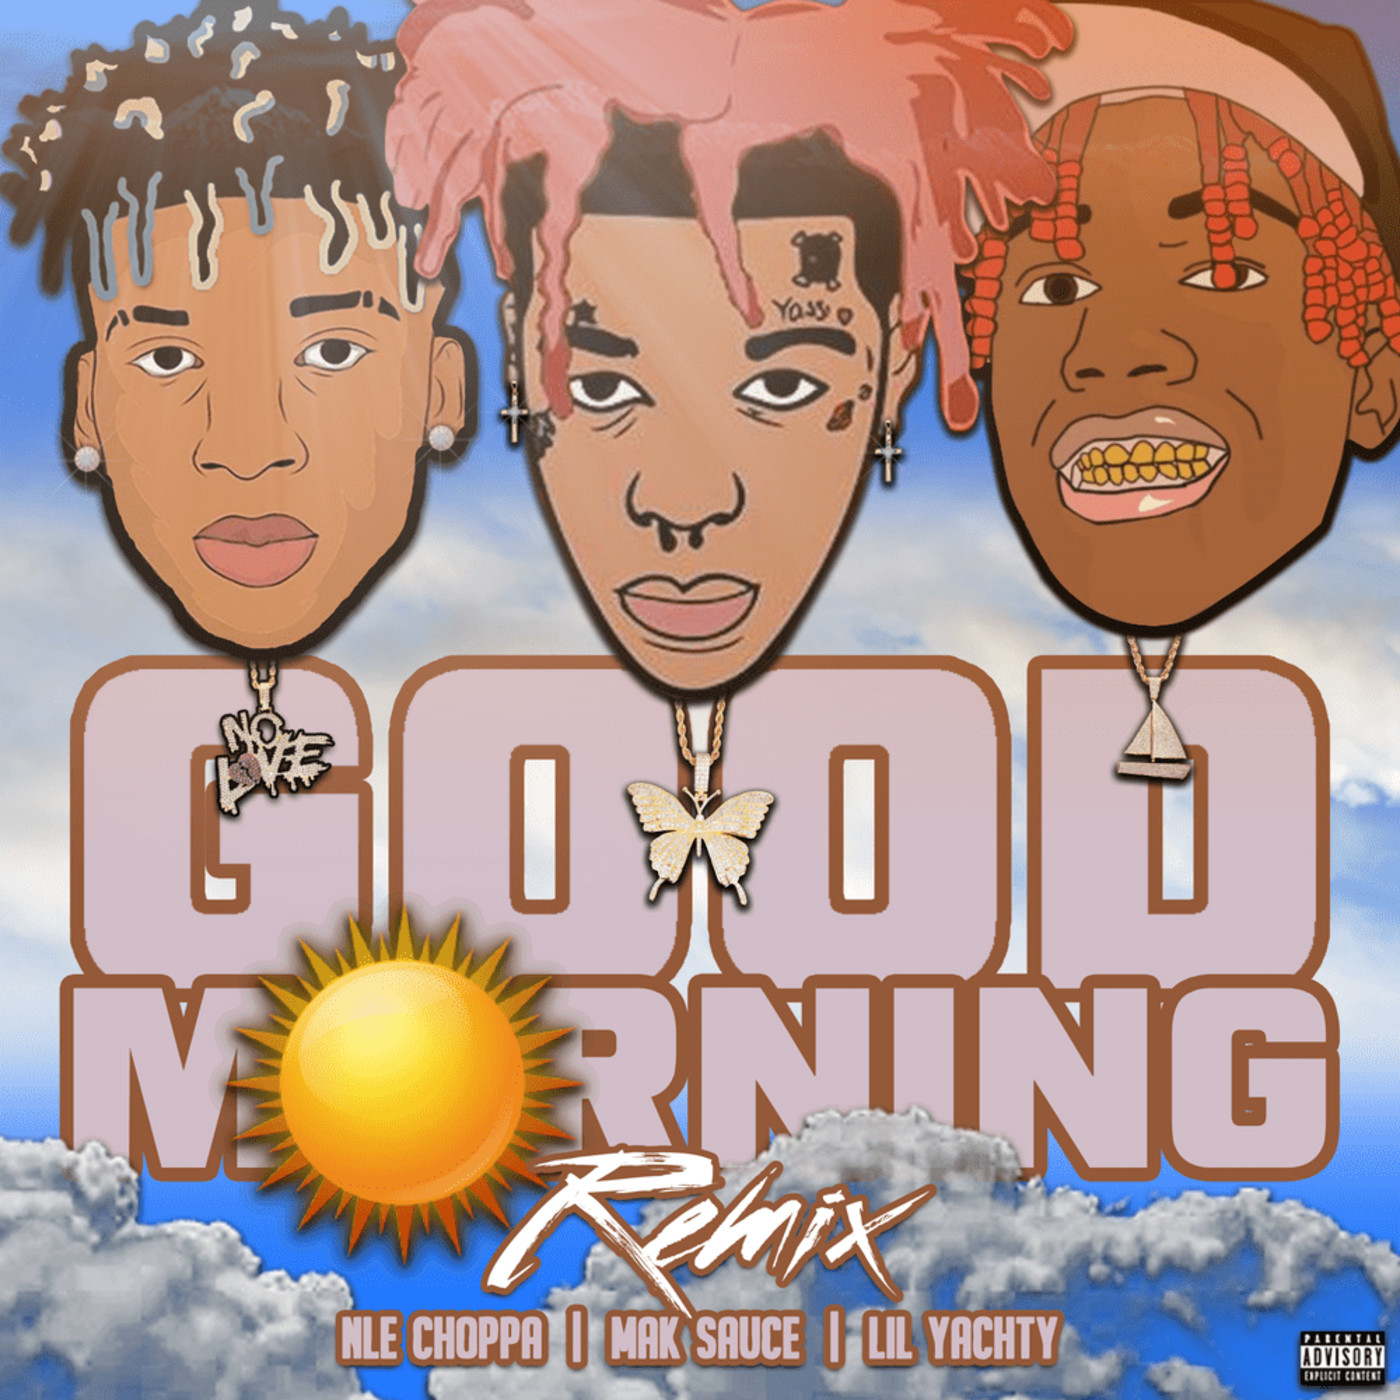 Lil Yachty And Nle Choppa Join Mak Sauce On Good Morning Remix